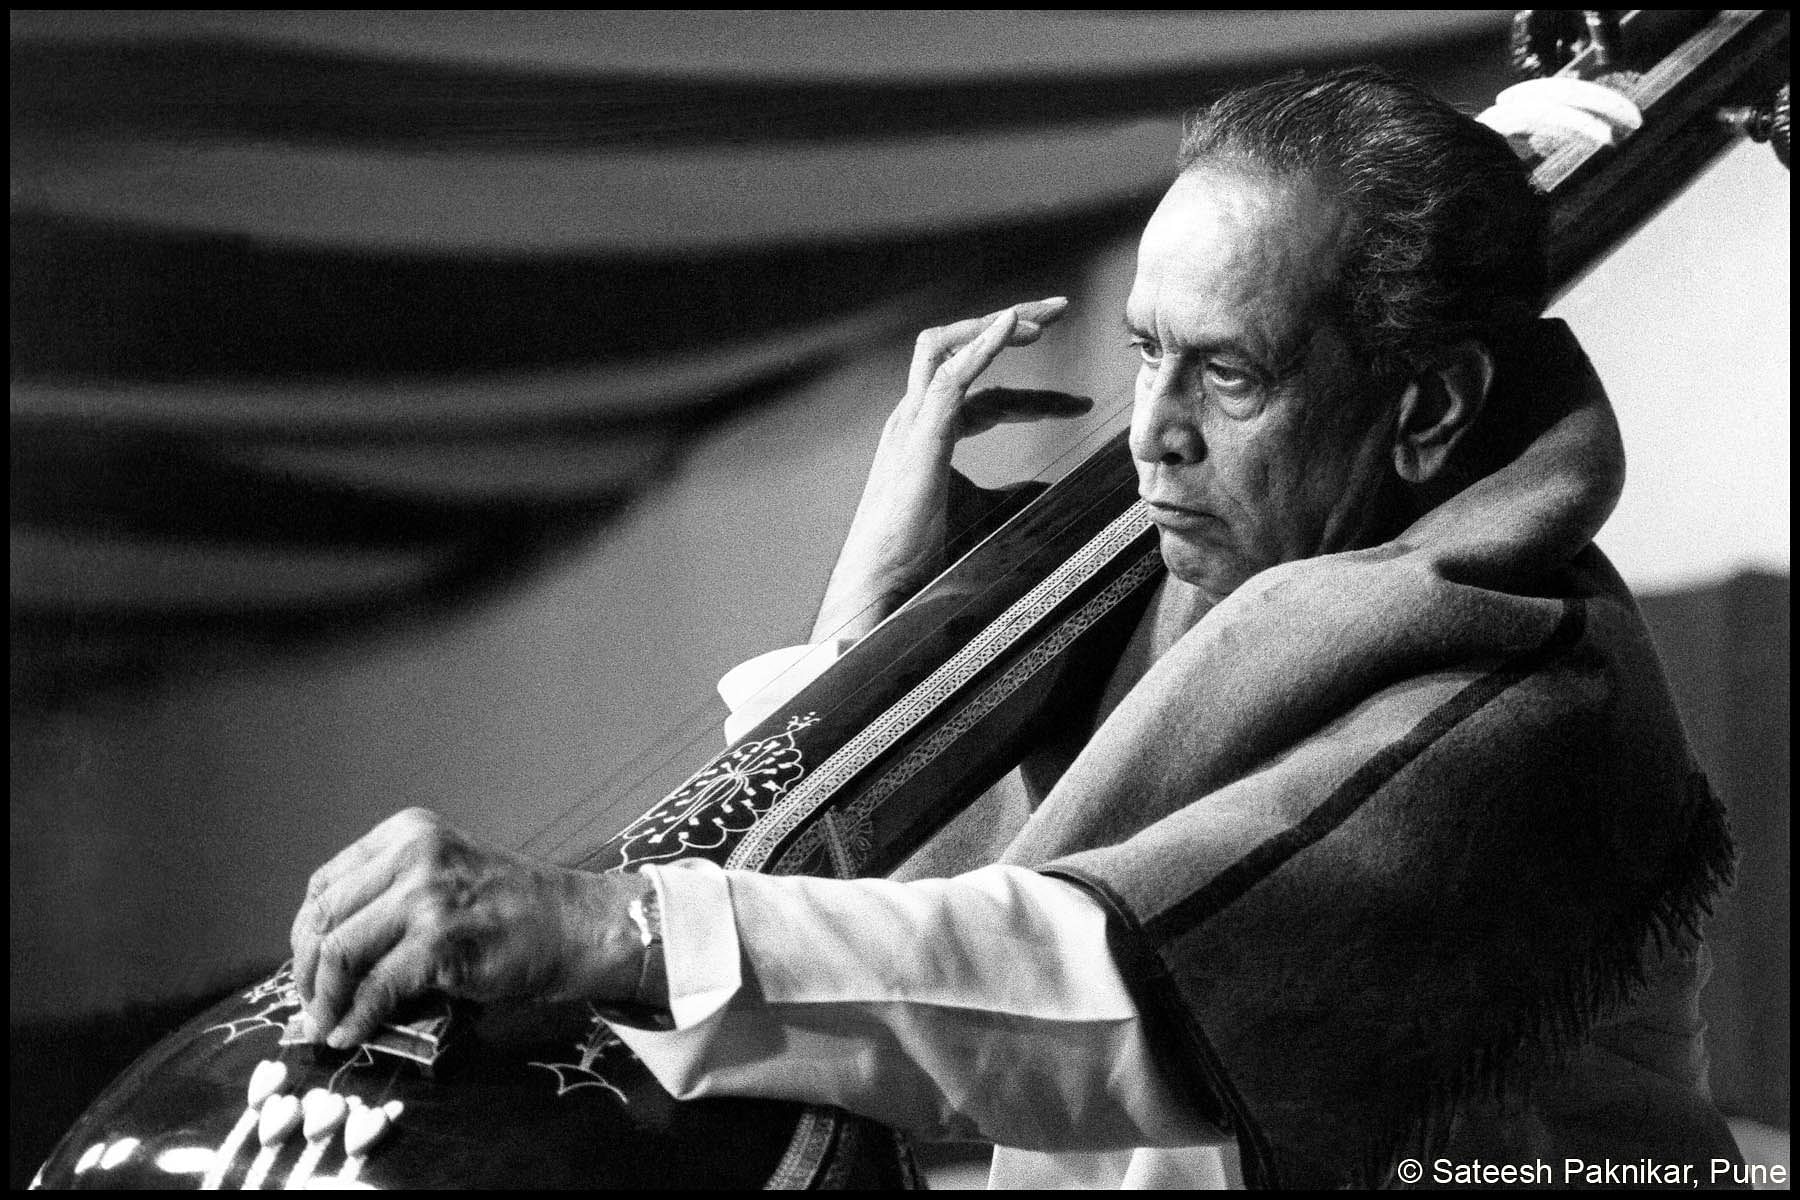 Bhimsen Joshi’s distinctive voice was a deviation from his gharana’s template. He was the first singer from the gharana with a deep and resonant voice.